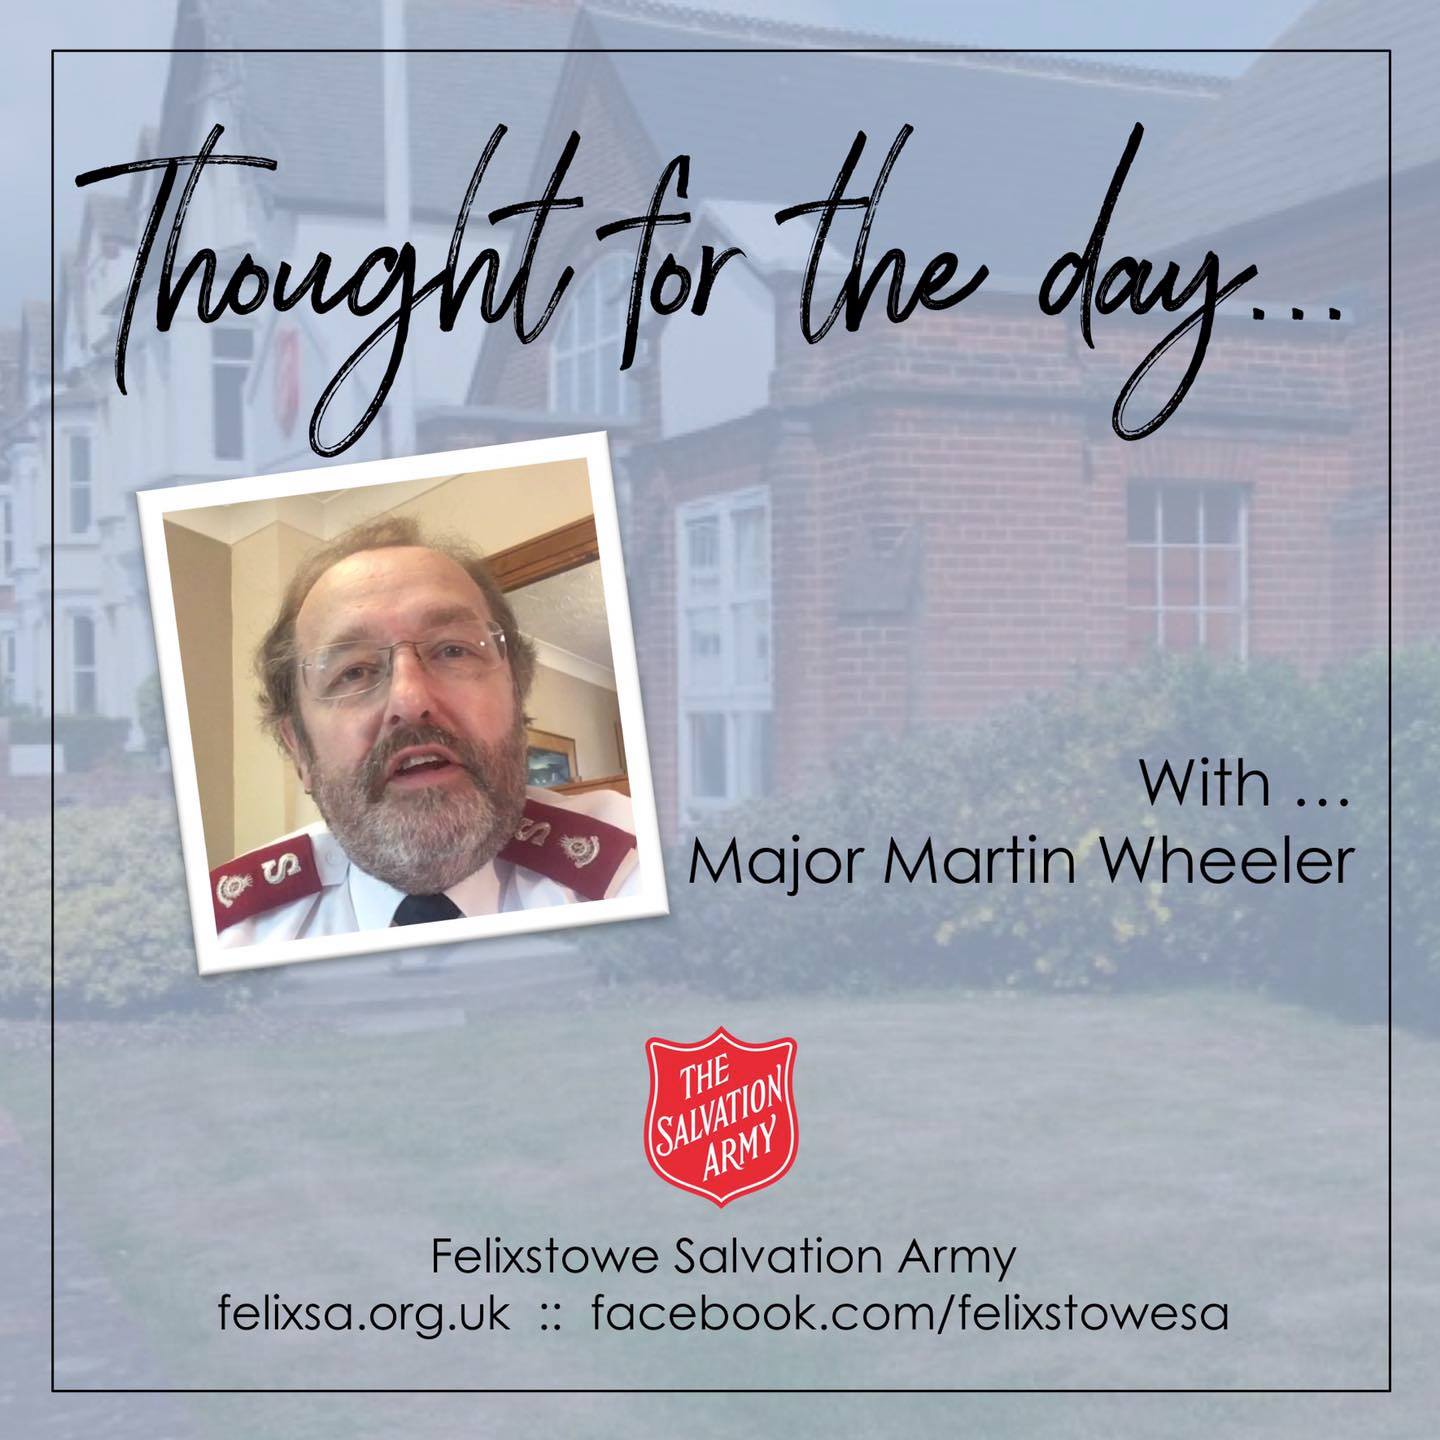 Thought for the Day with Major Martin Wheeler